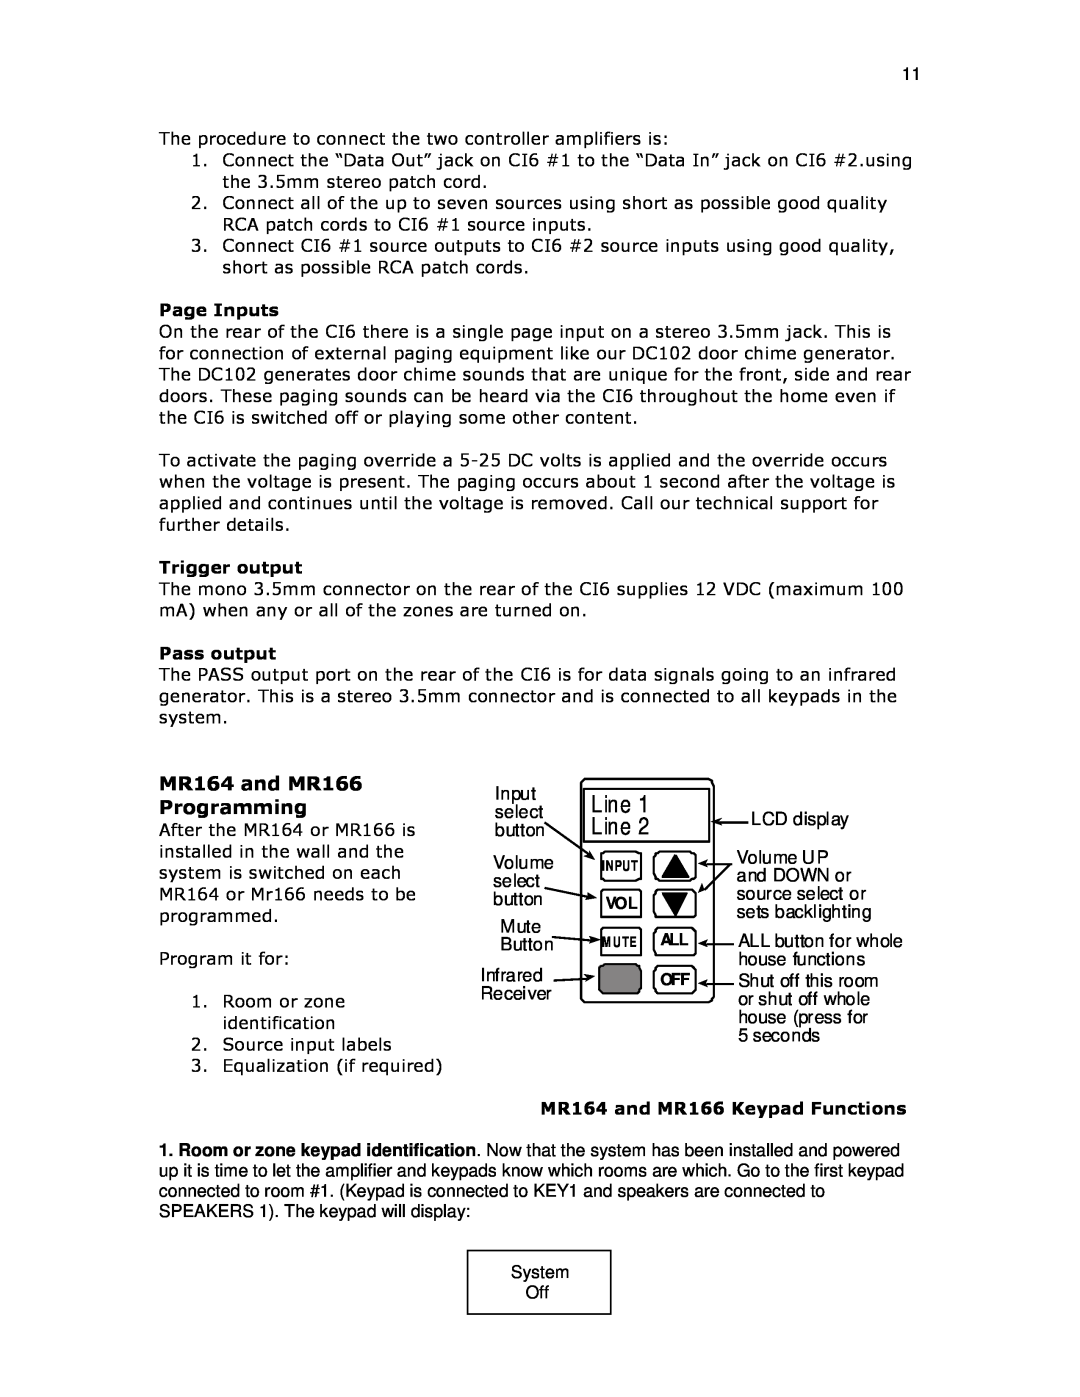 Knoll Systems C16 installation instructions MR164 and MR166 Programming, Line 